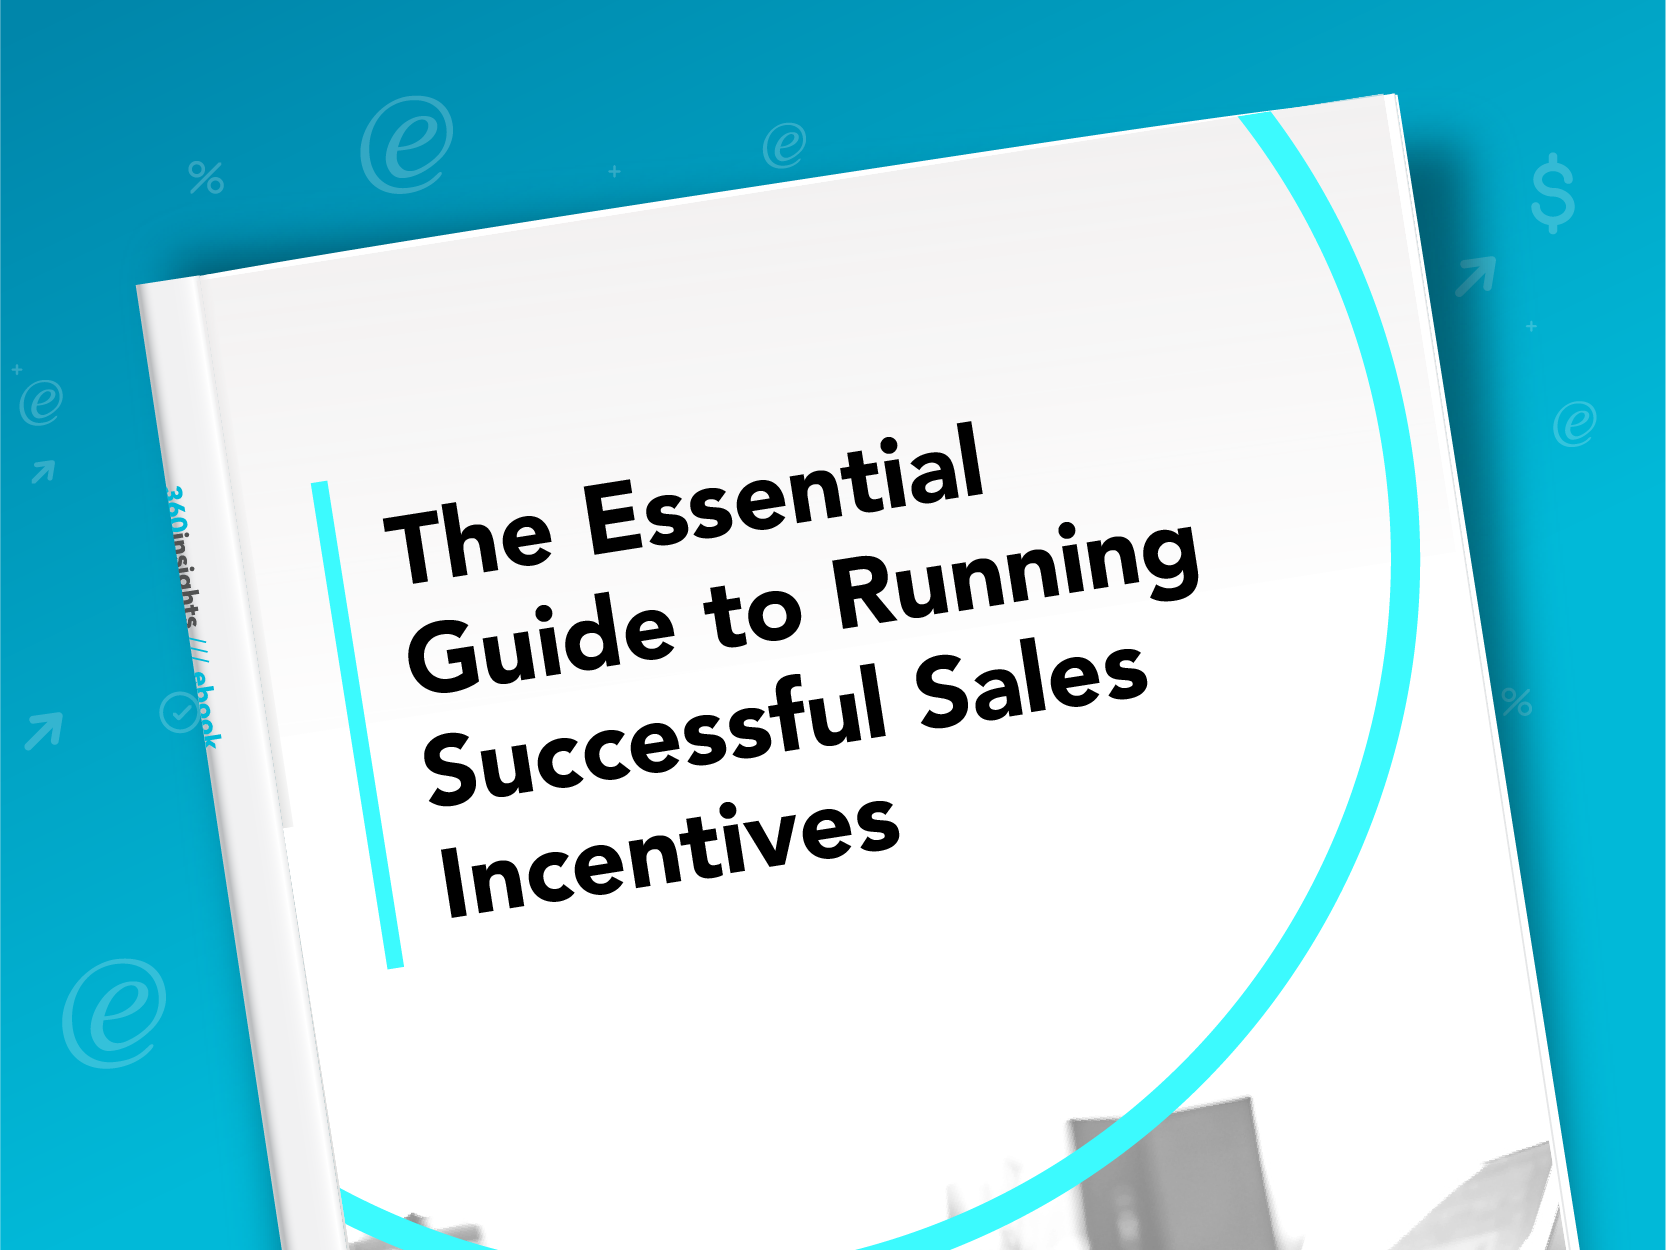 eBook about the essentials to running a successful sales incentive program